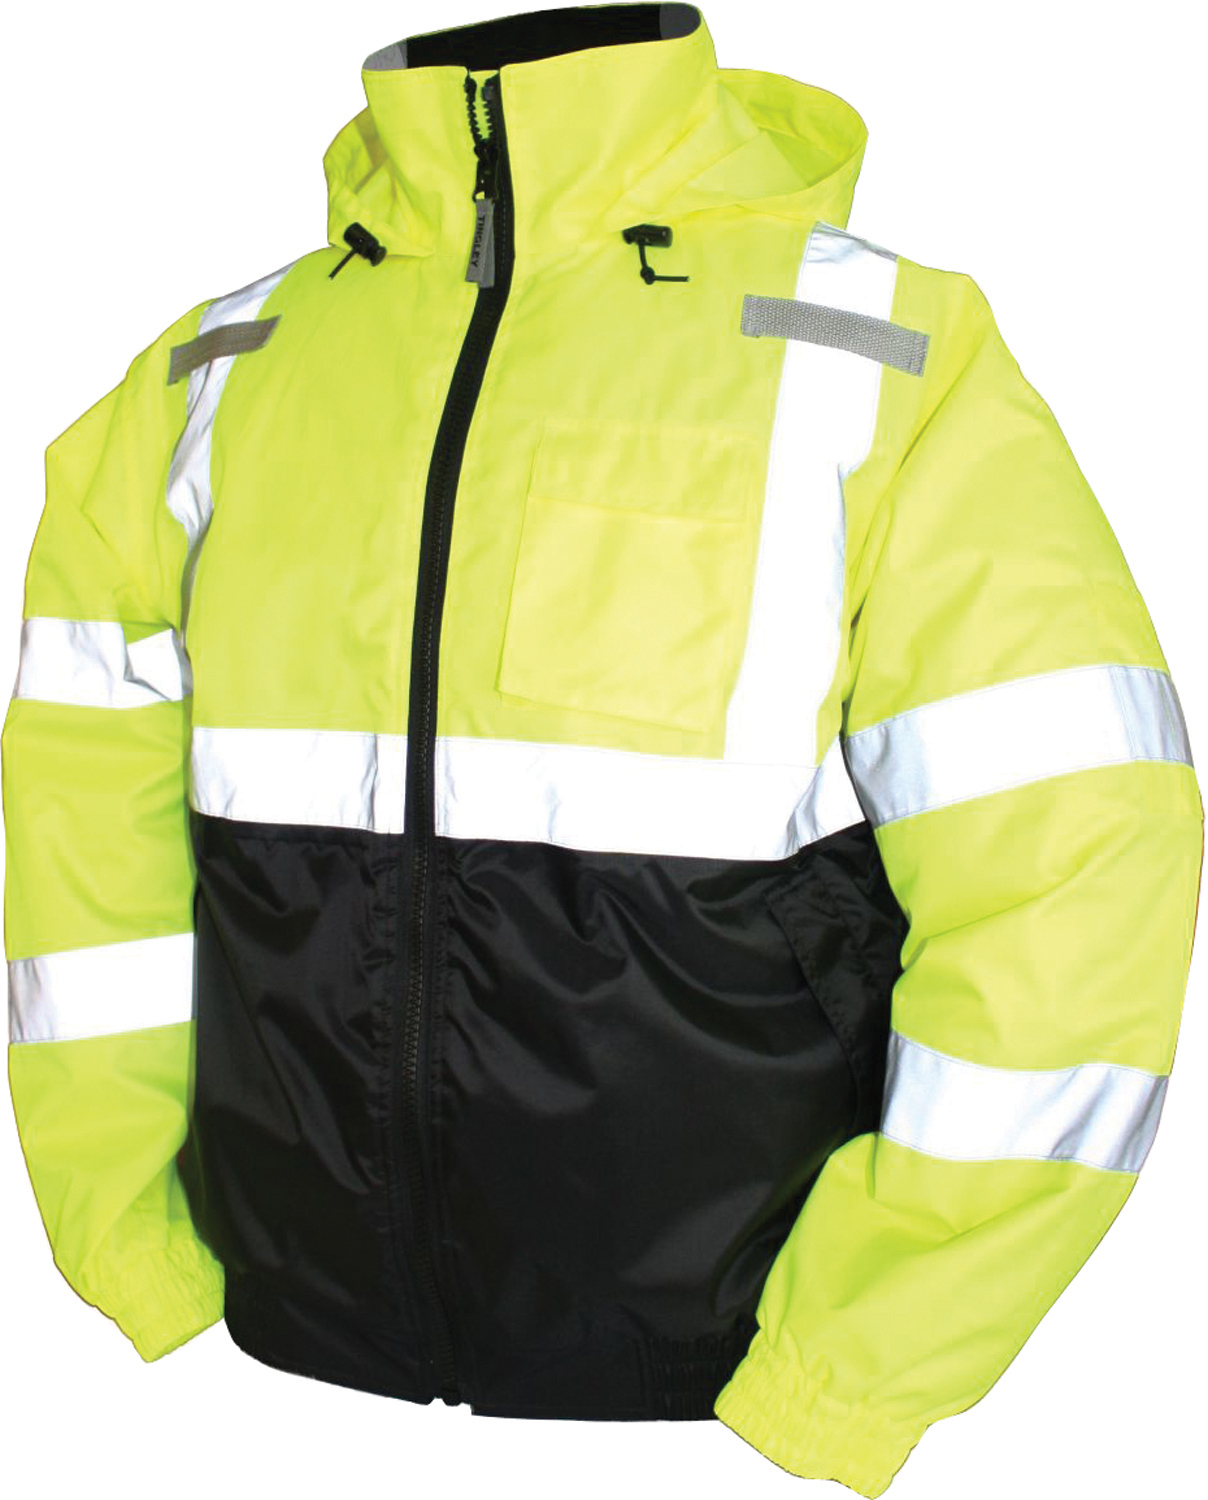 Tingley Rubber Corp.-Bomber Ii High Visibility Waterproof Jacket- Lime Green 2 Extra Large - image 2 of 4